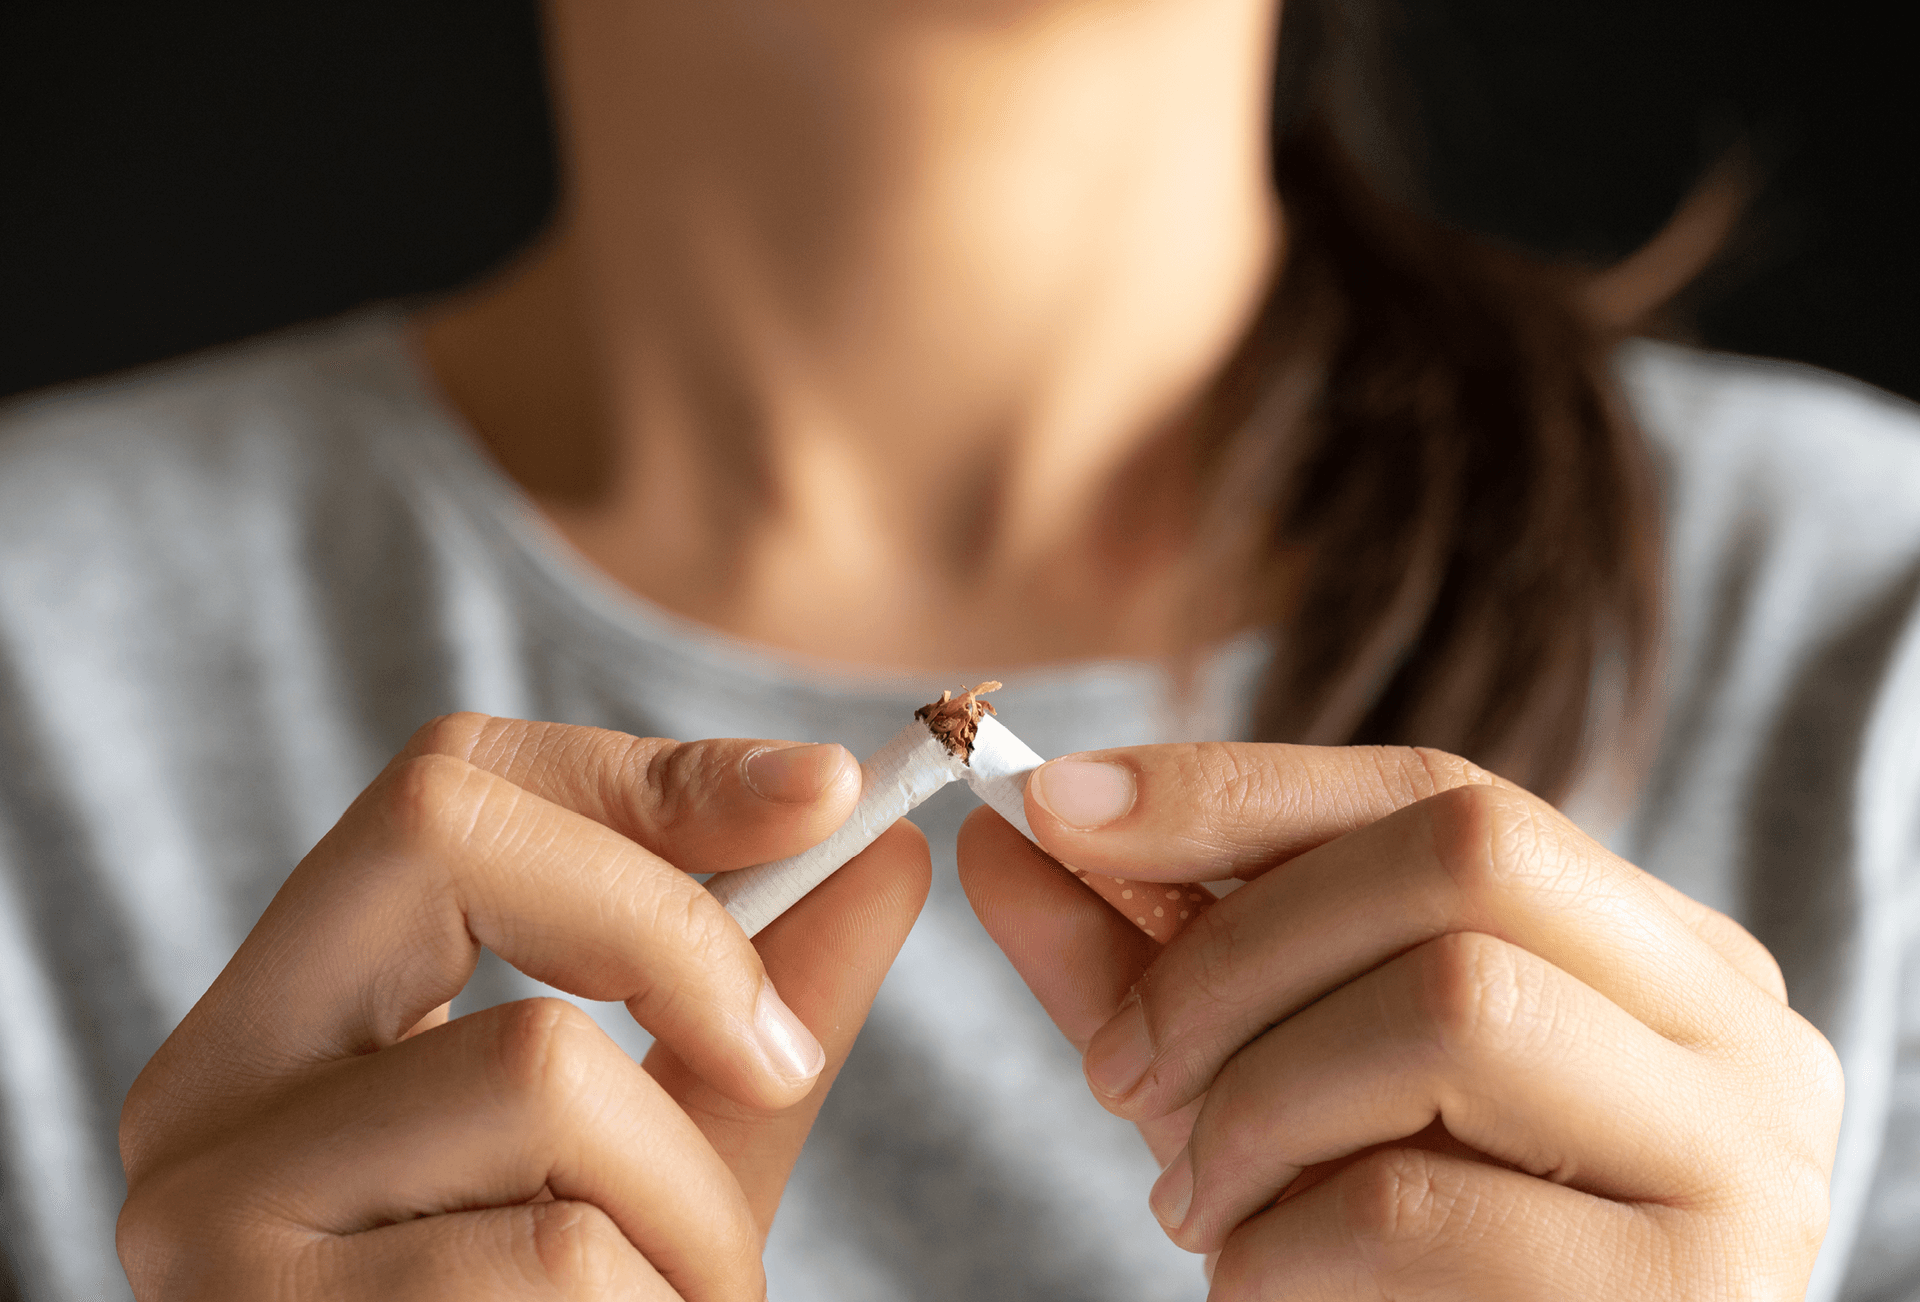 lady snapping cigarette in half to quit smoking